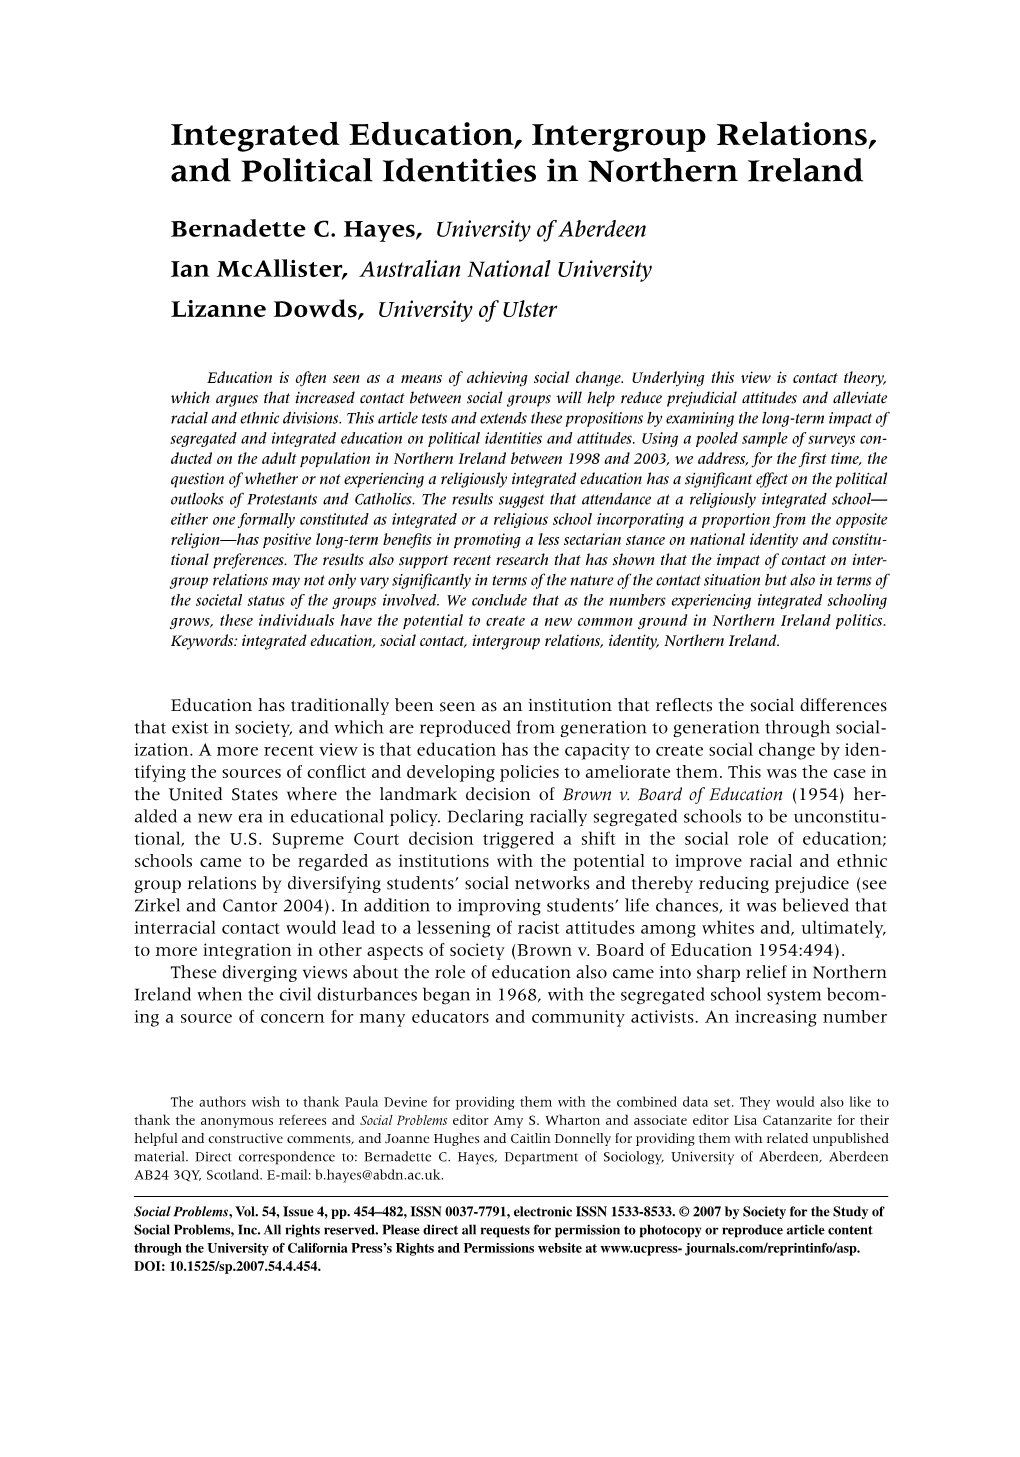 Integrated Education, Intergroup Relations, and Political Identities in Northern Ireland